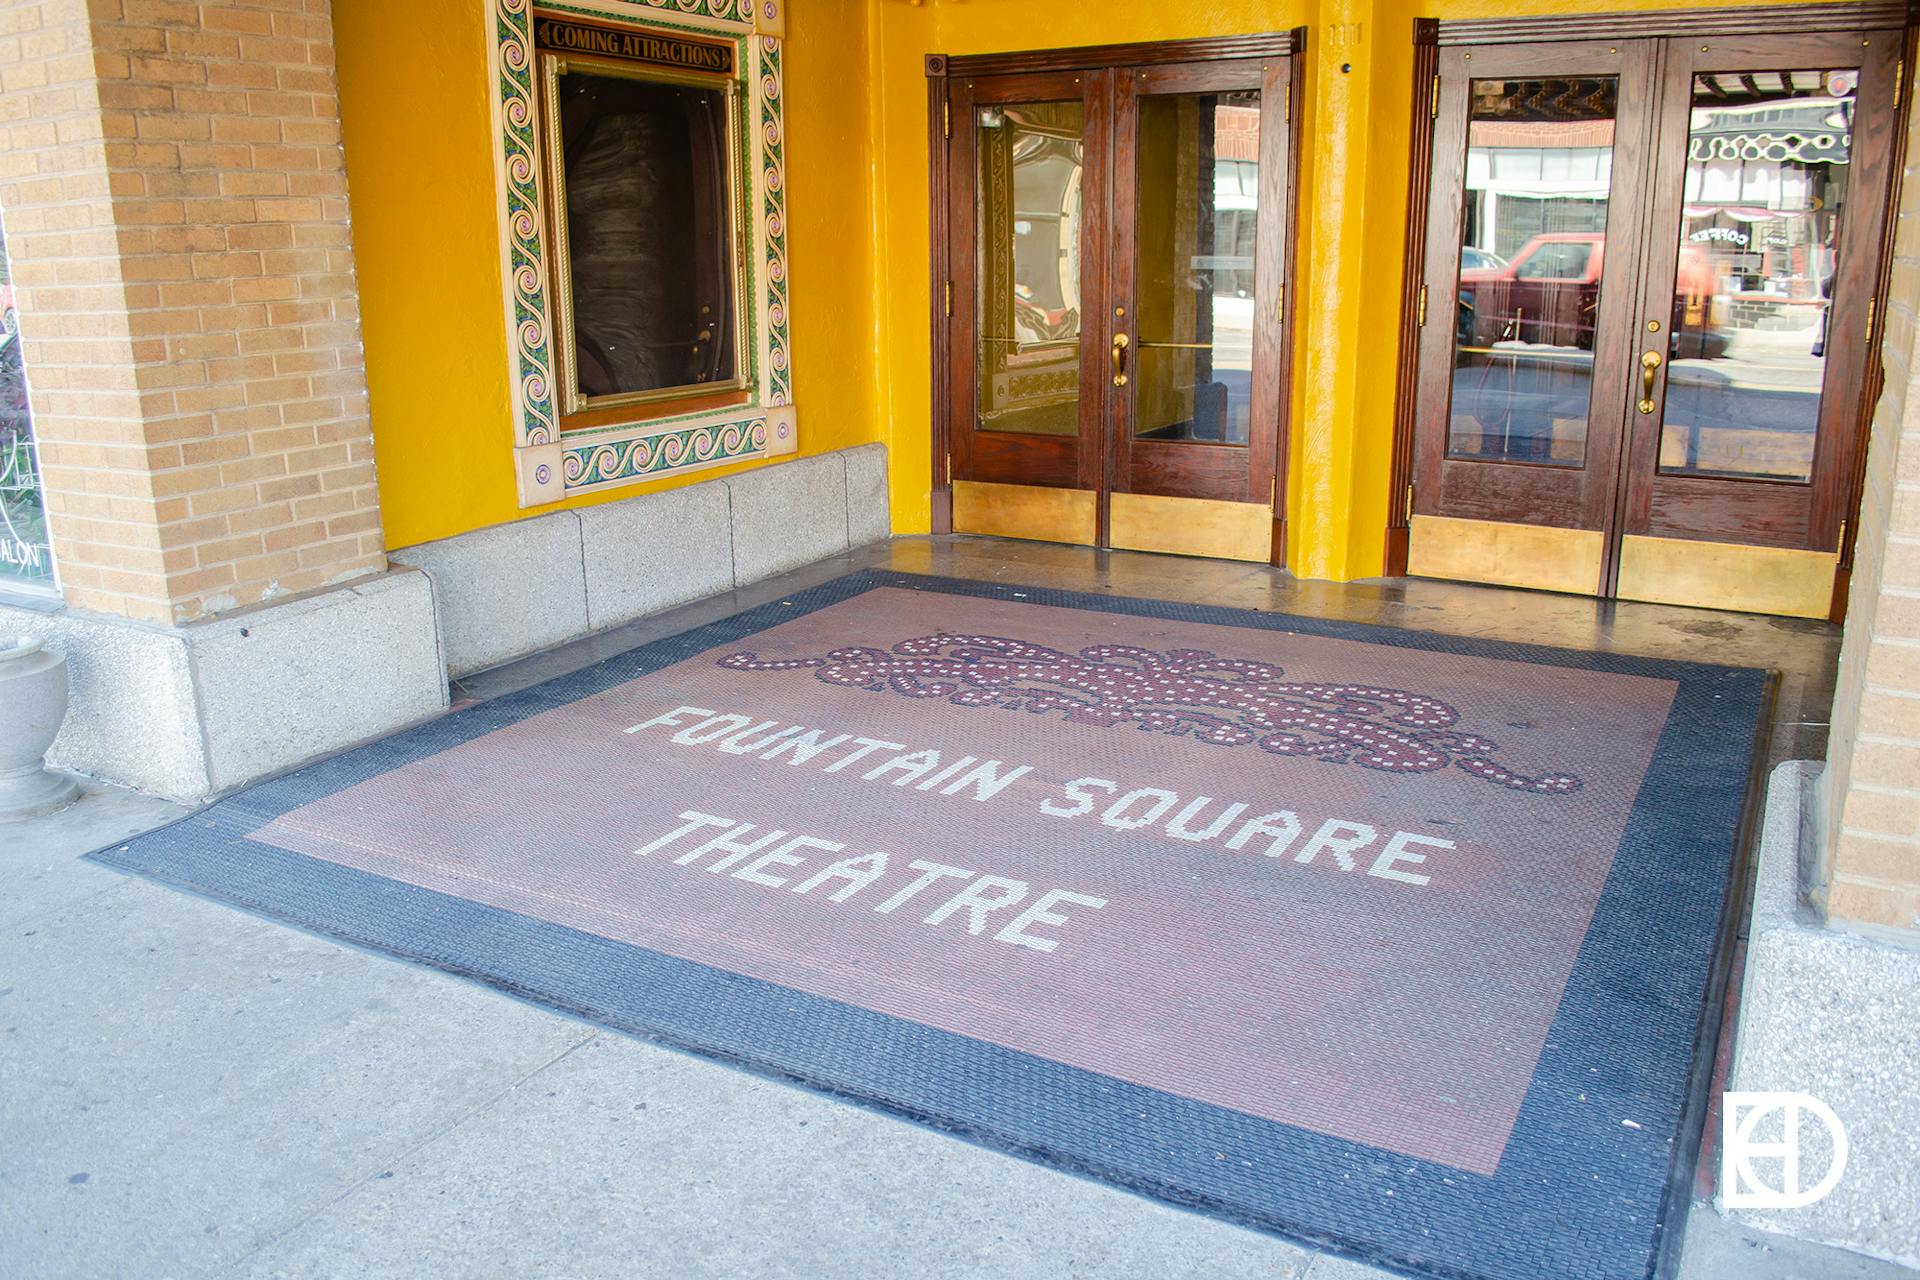 Photo of the entrance of Fountain Square Theatre